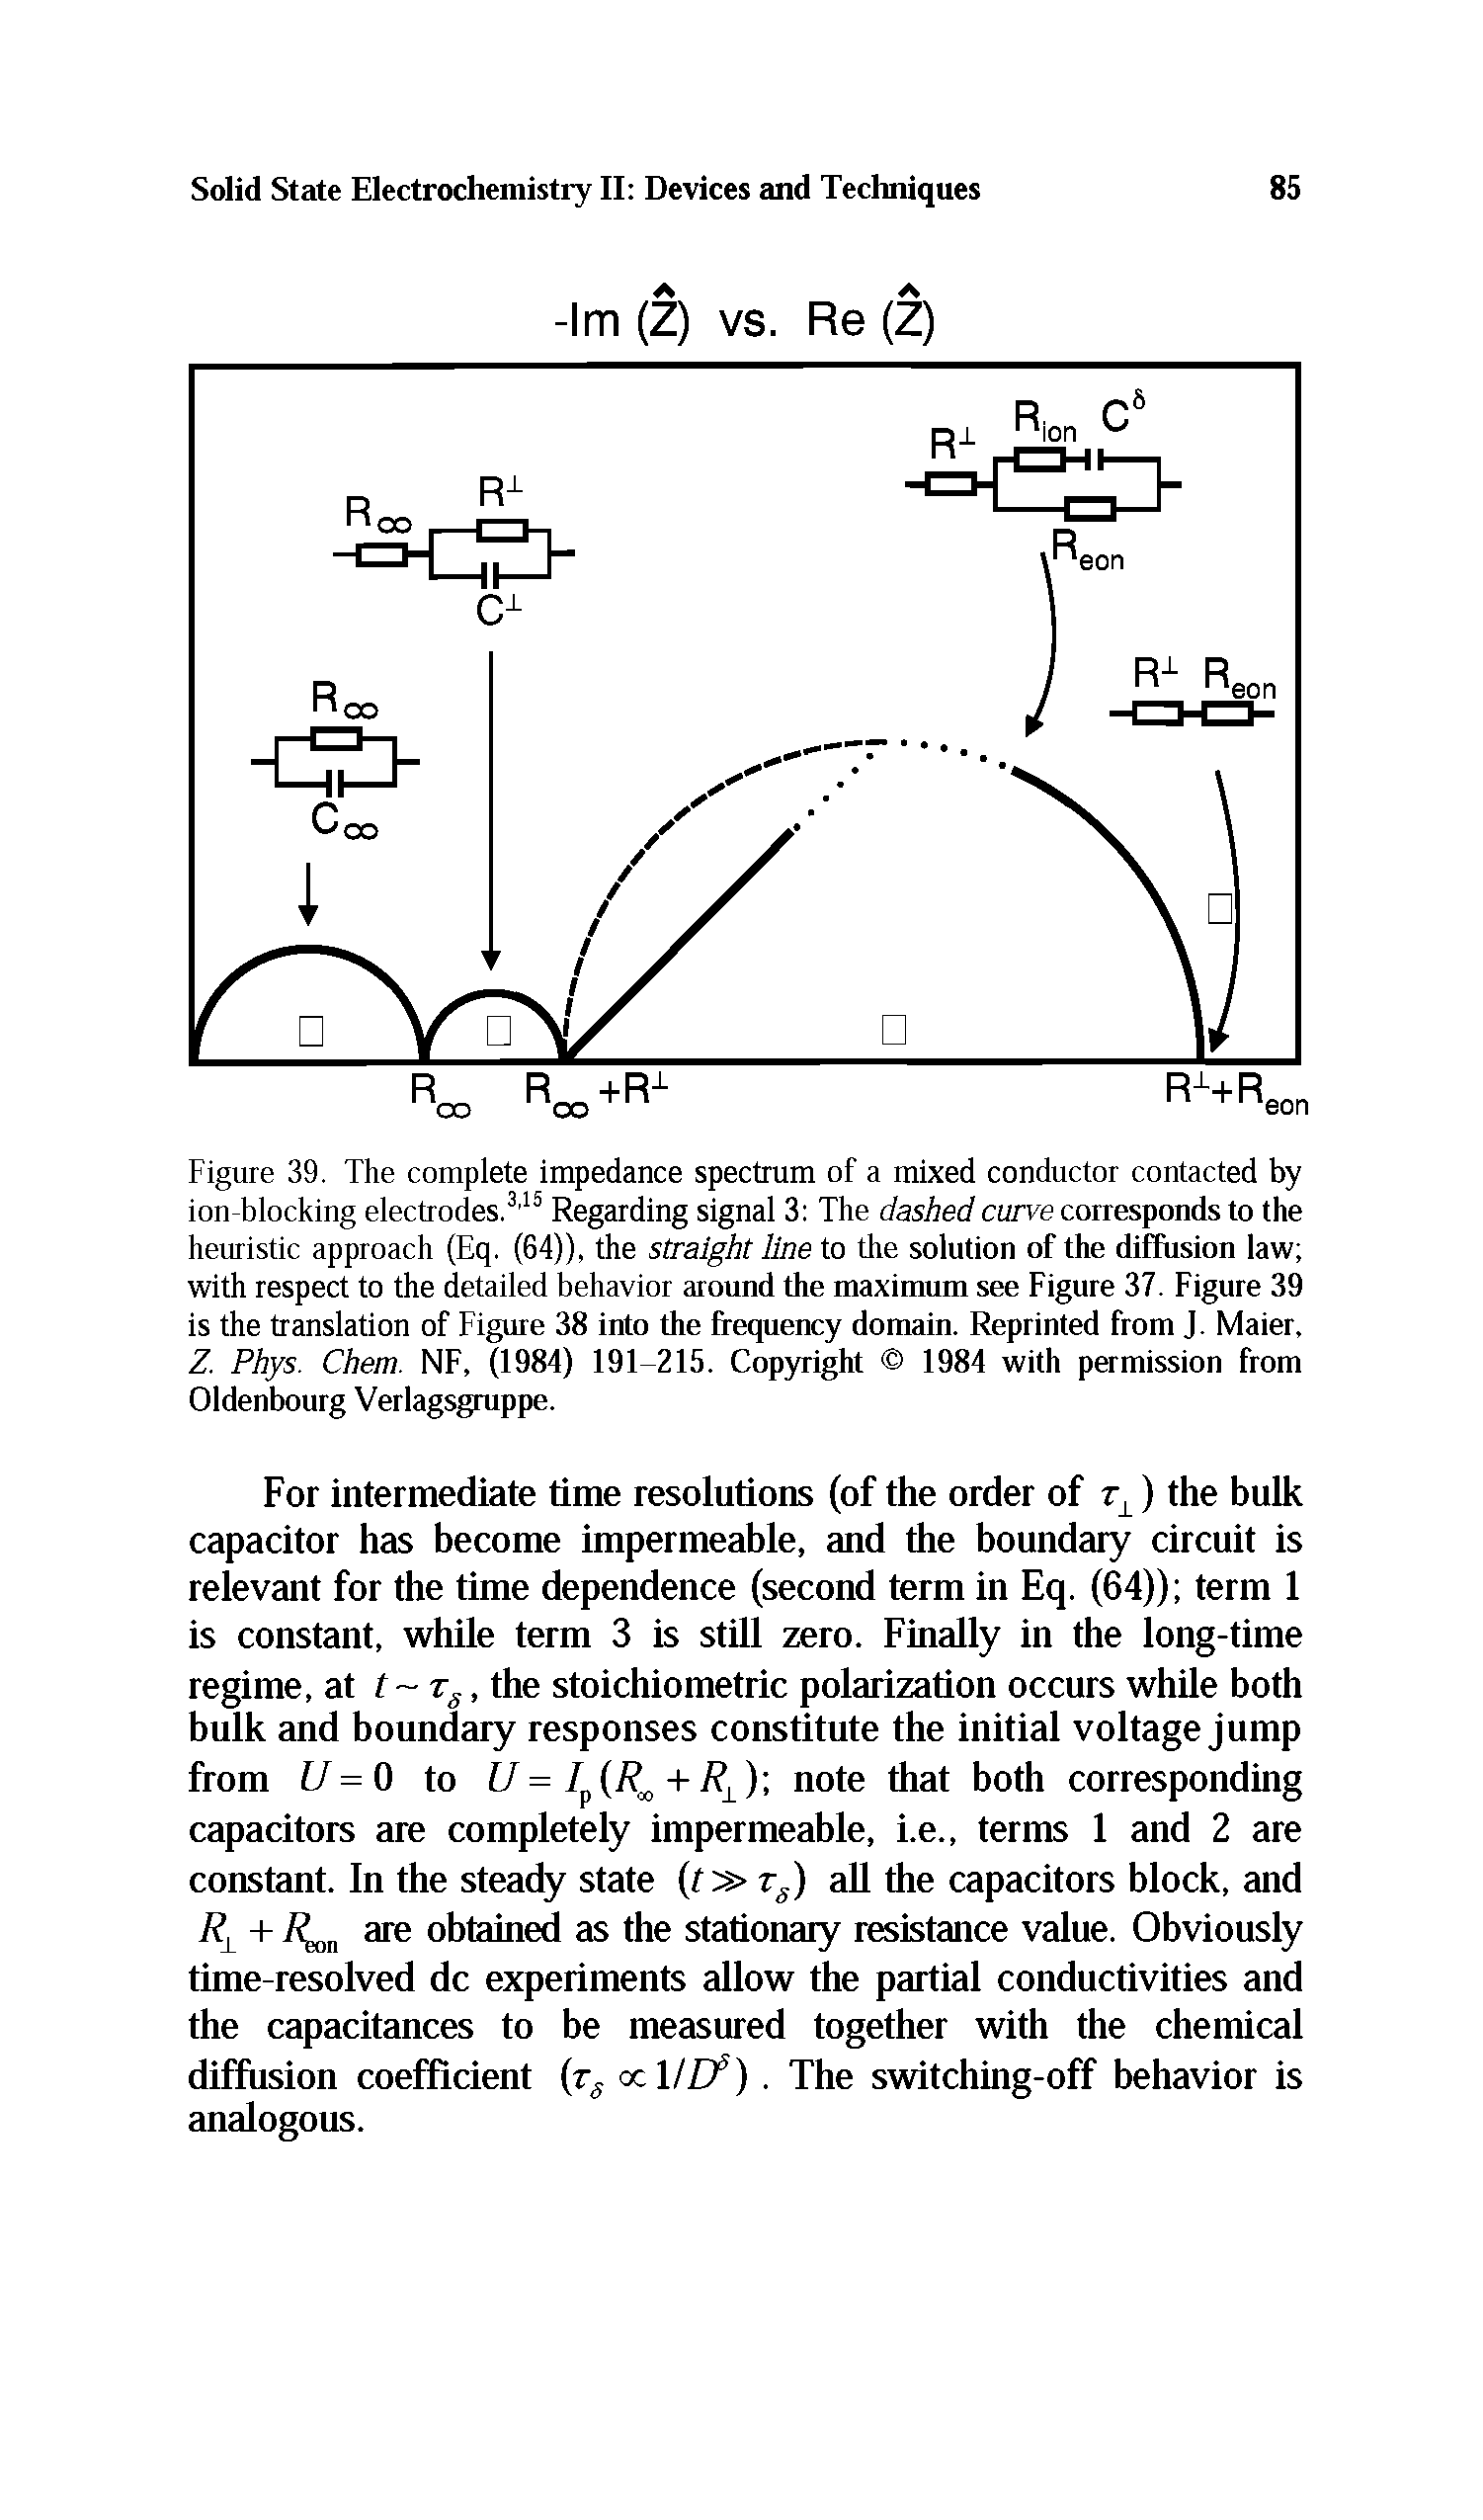 Figure 39. The complete impedance spectrum of a mixed conductor contacted by ion-blocking electrodes.3,15 Regarding signal 3 The dashed curve corresponds to the heuristic approach (Eq. (64)), the straight line to the solution of the diffusion law with respect to the detailed behavior around the maximum see Figure 37. Figure 39 is the translation of Figure 38 into the frequency domain. Reprinted from J. Maier, Z. Phys. Chem. NF, (1984) 191-215. Copyright 1984 with permission from Oldenbourg Verlagsgruppe.